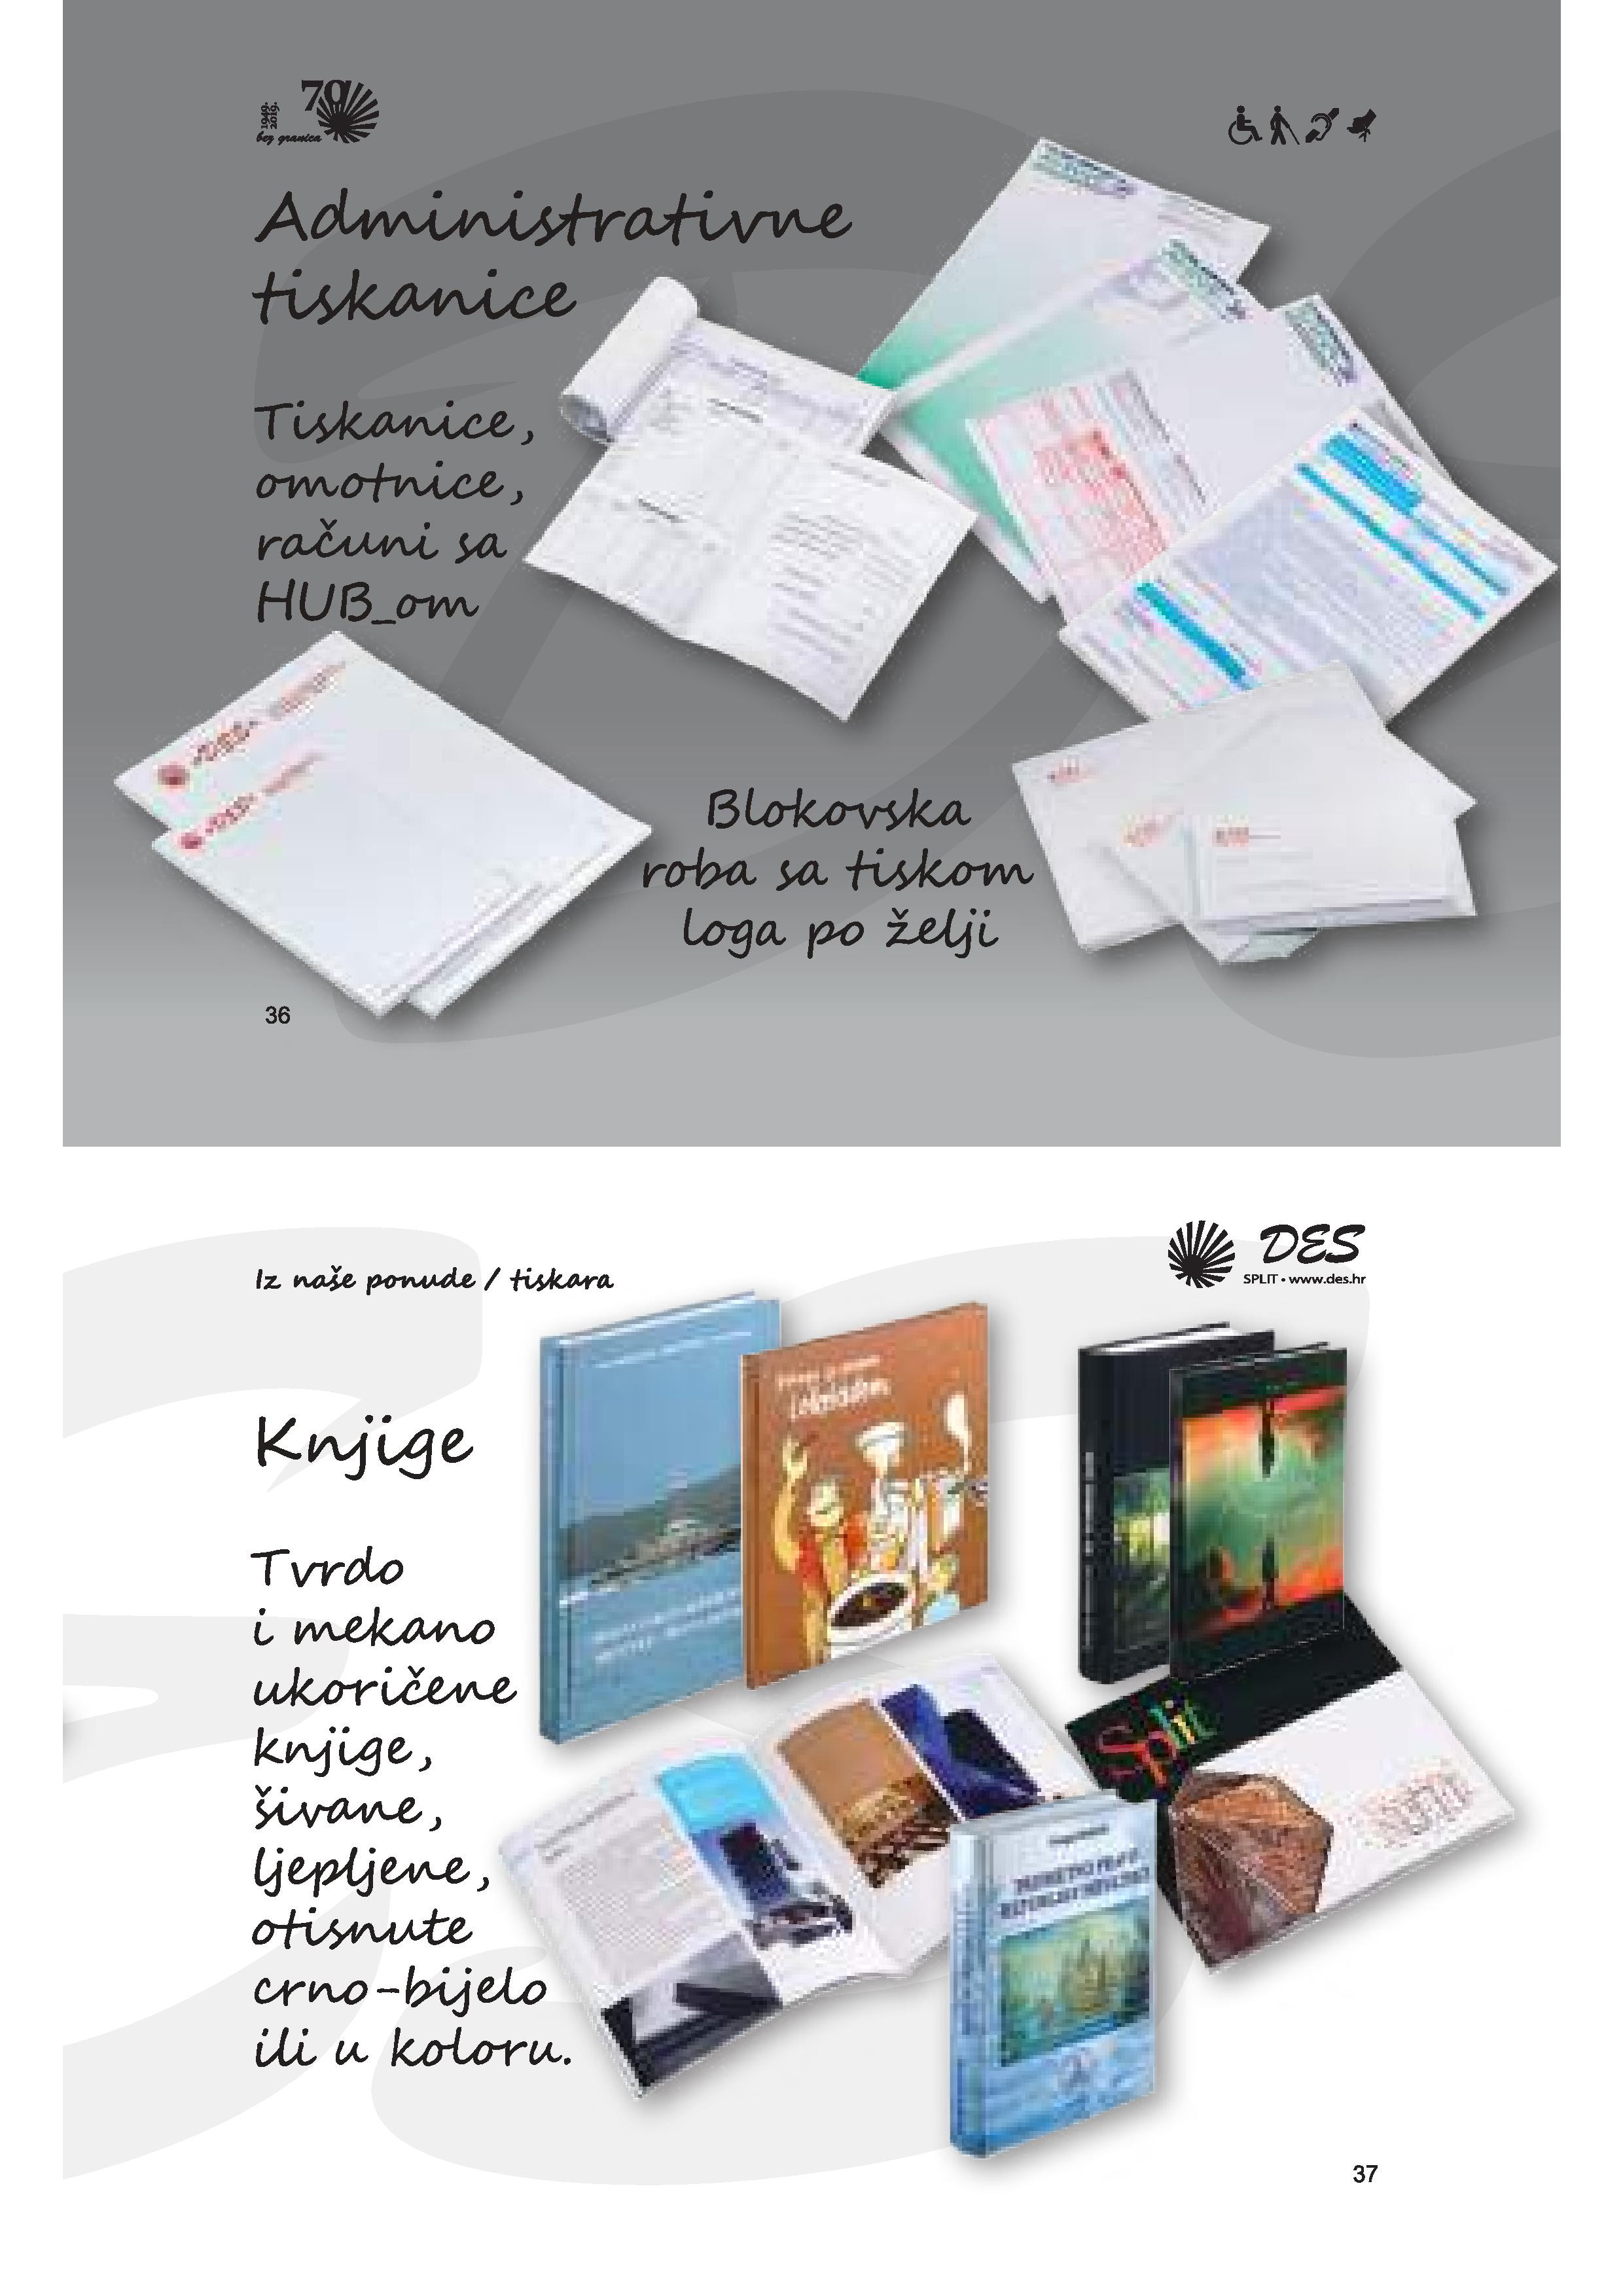 A4 Katalog Preview Compressed Compressed Compressed Page 020